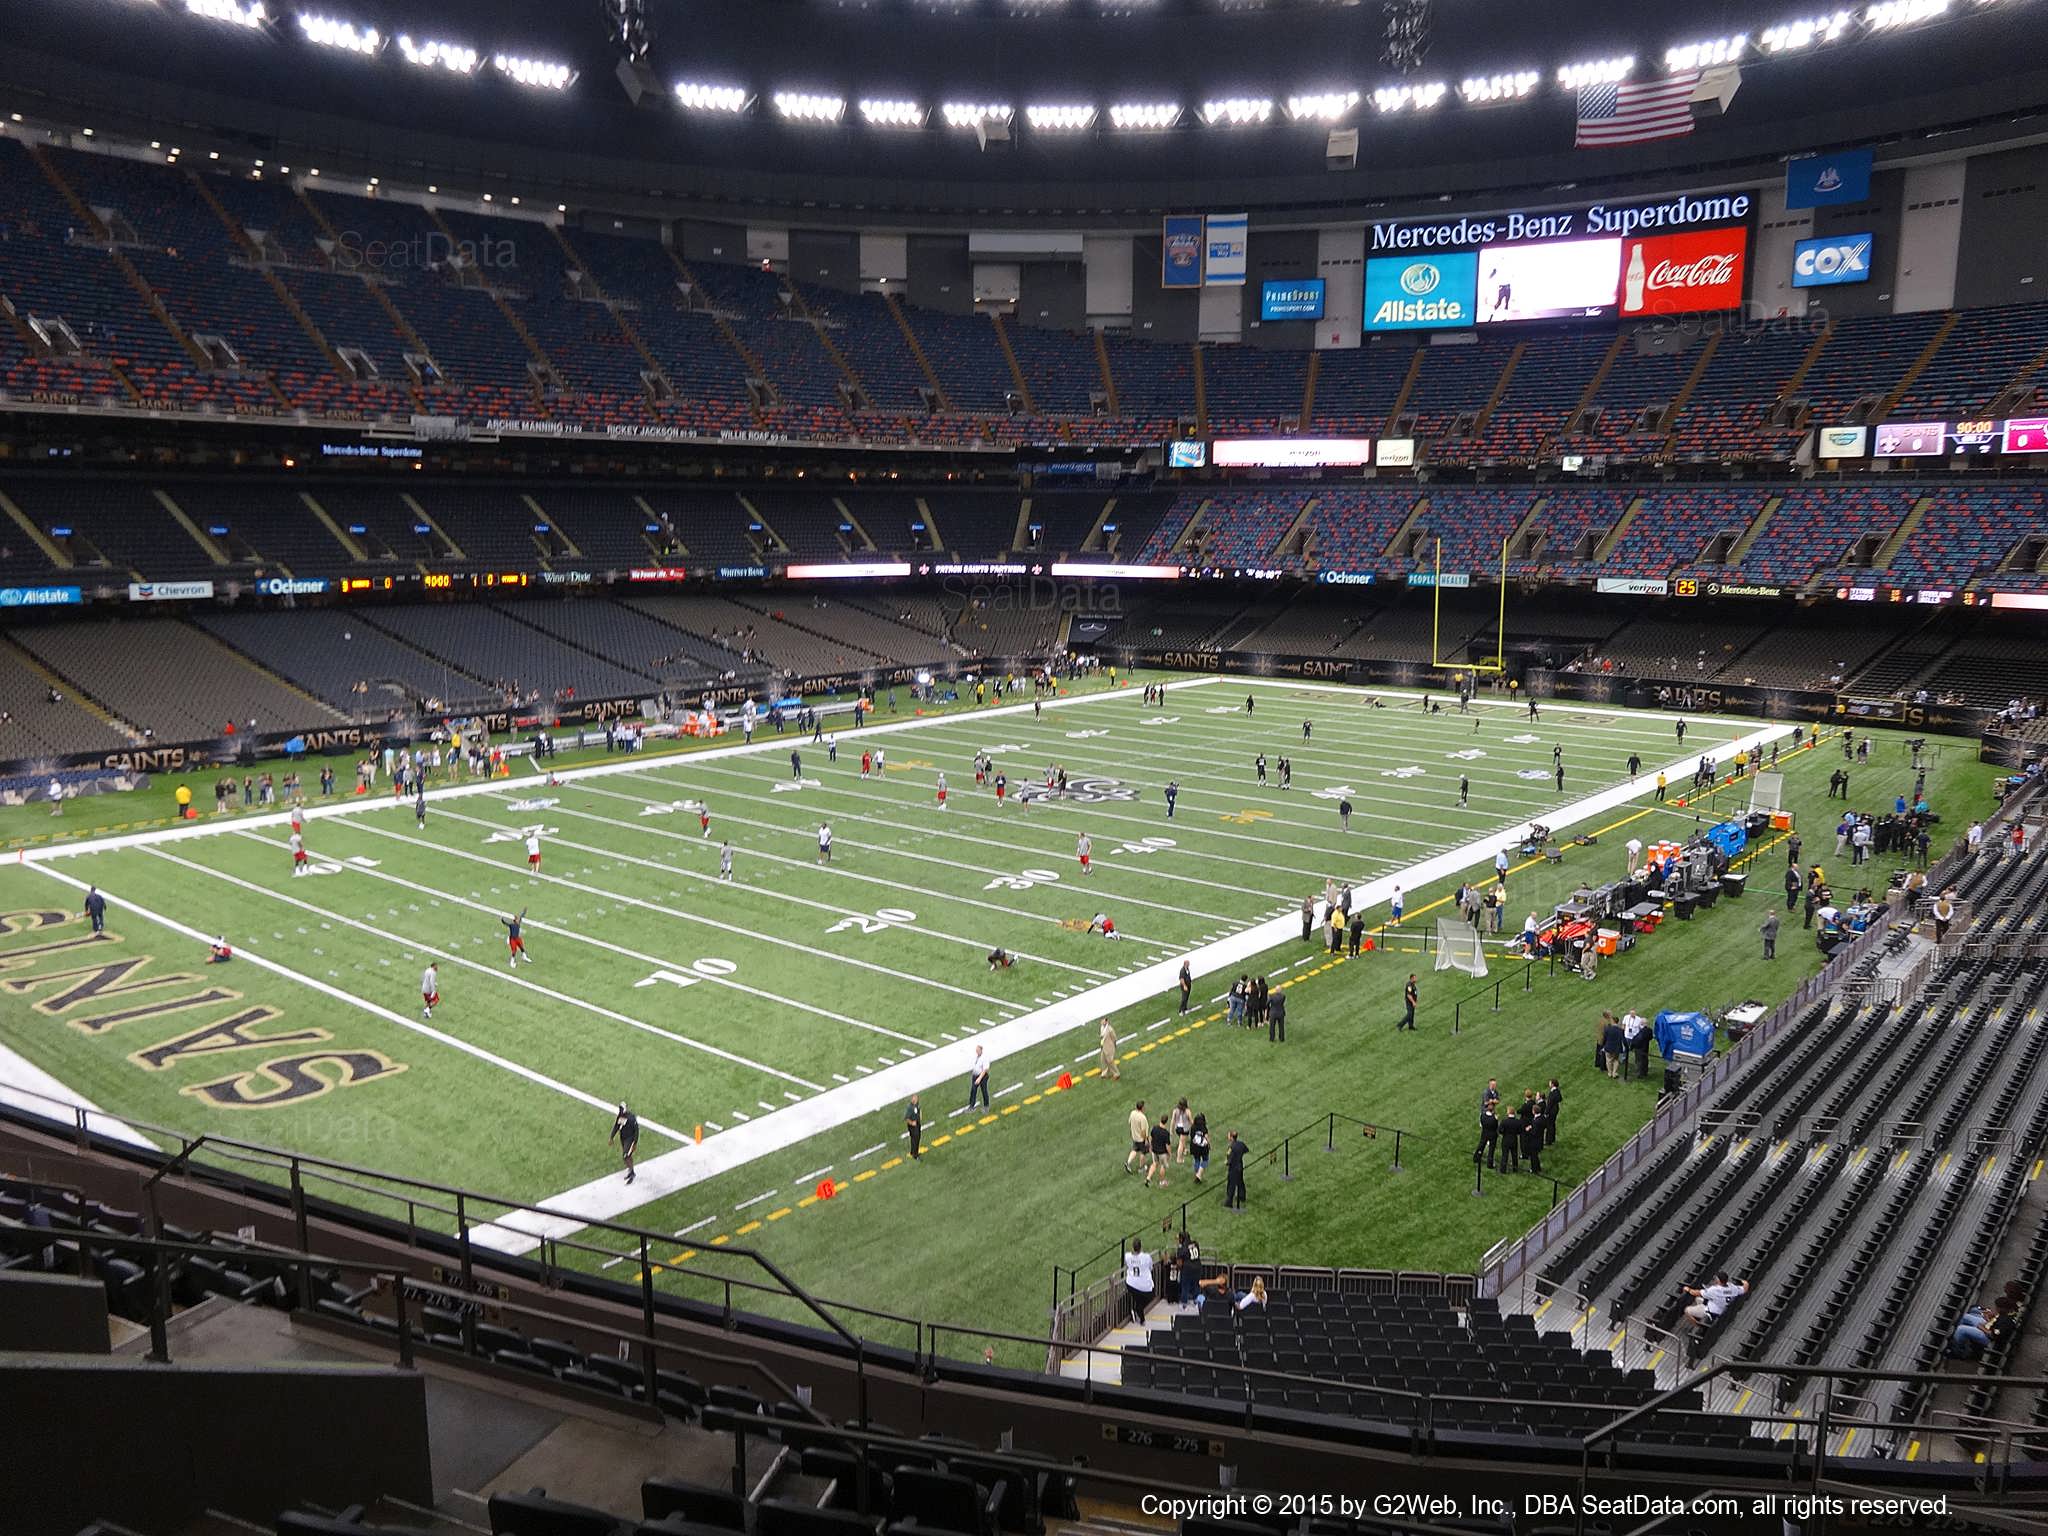 Seat view from section 343 at the Mercedes-Benz Superdome, home of the New Orleans Saints